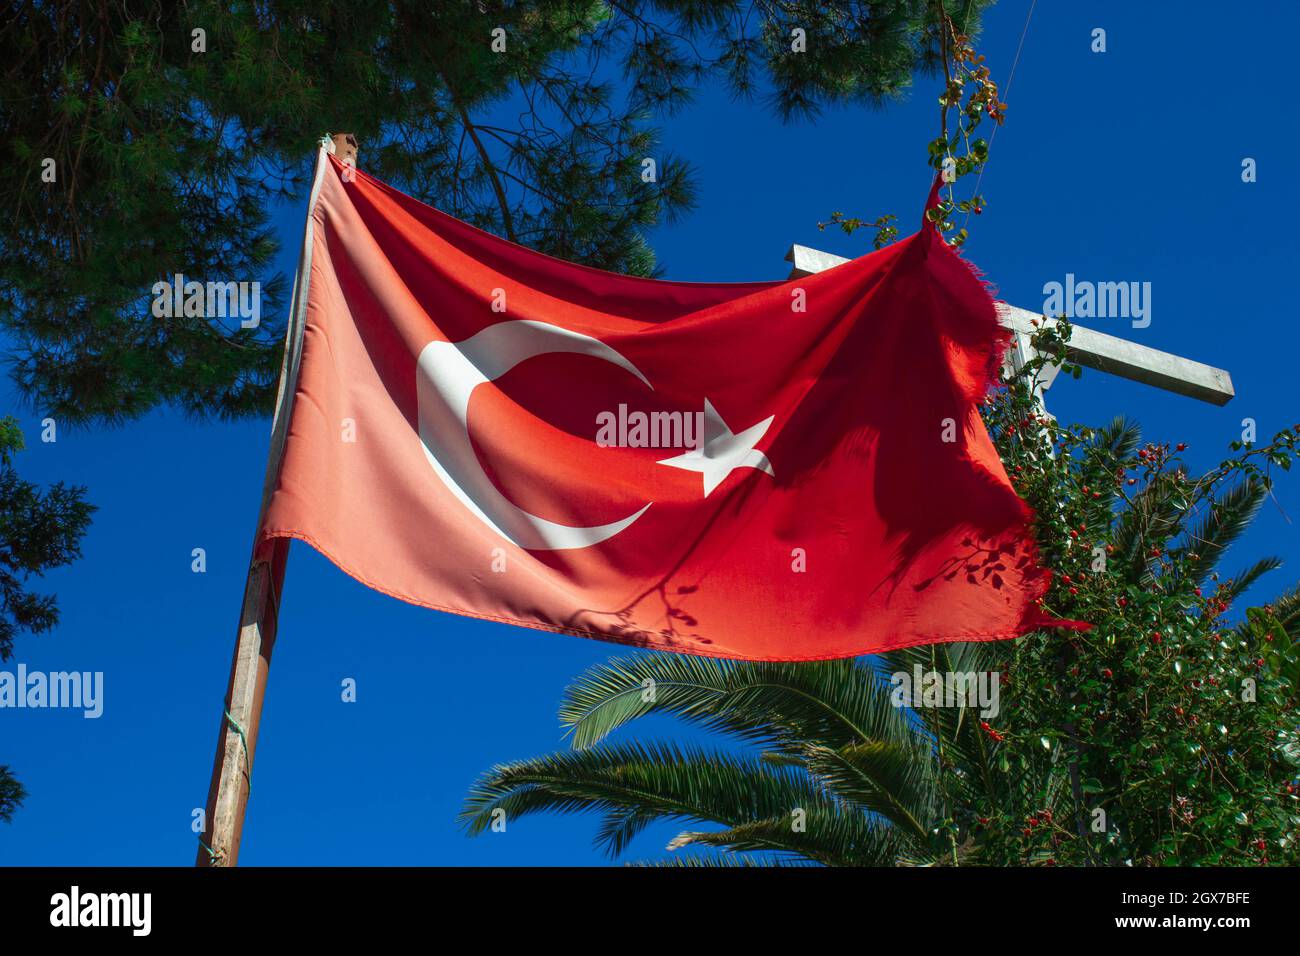 A deformed Turkish flag. Red base and white crescent. Stock Photo